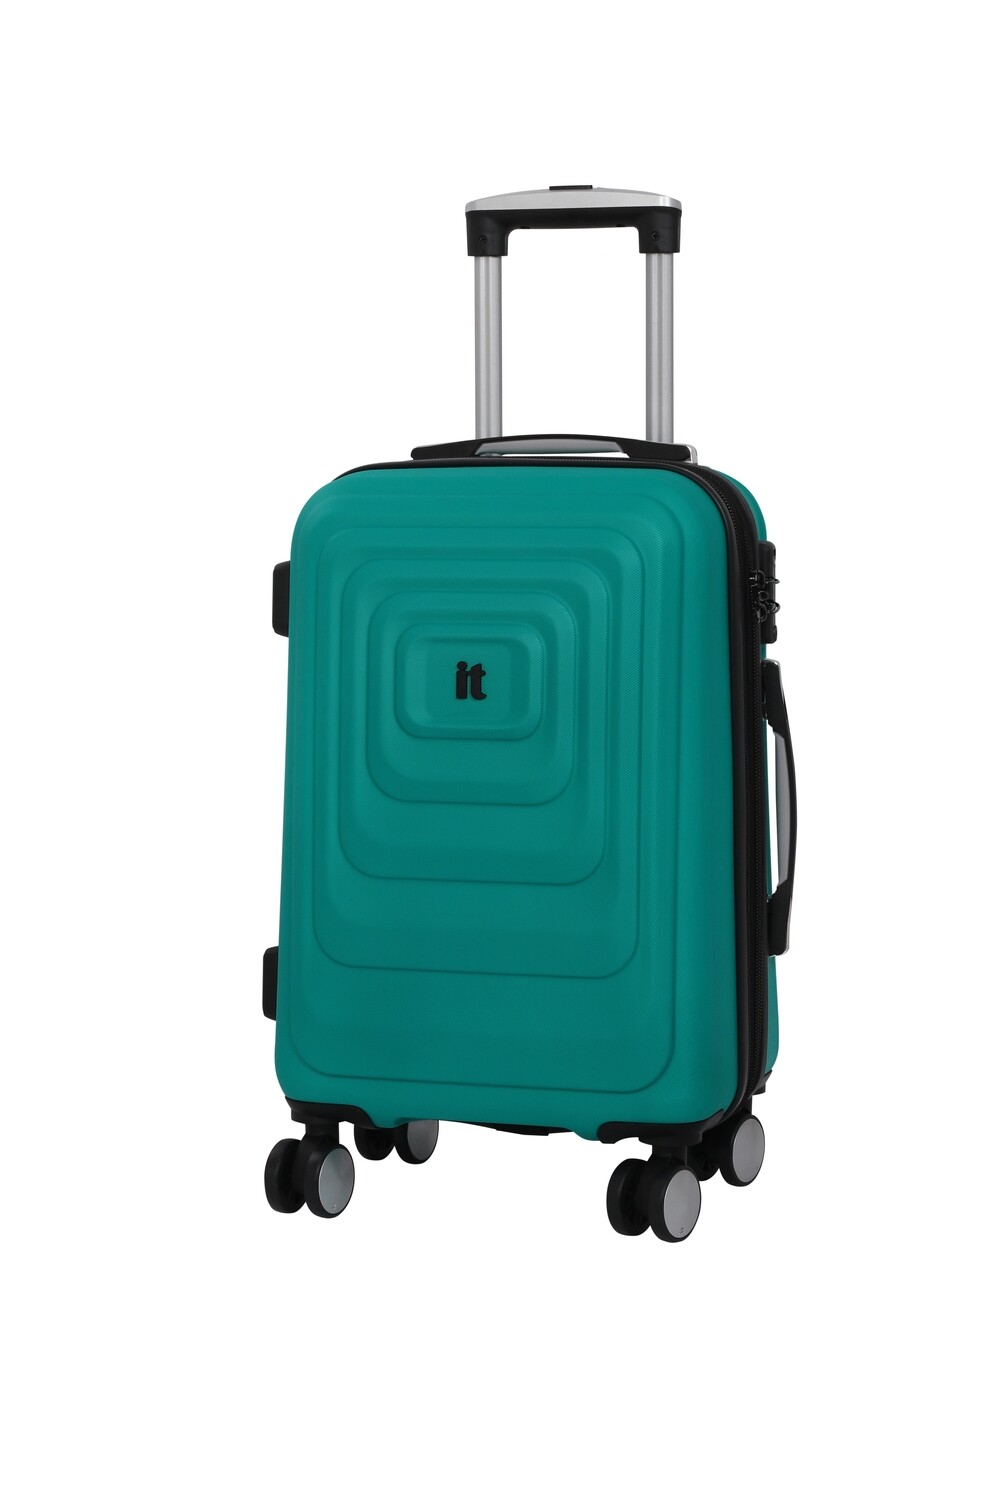 IT LUGGAGE MESMERIZE 21" STRONG TROLLEY CERAMIC